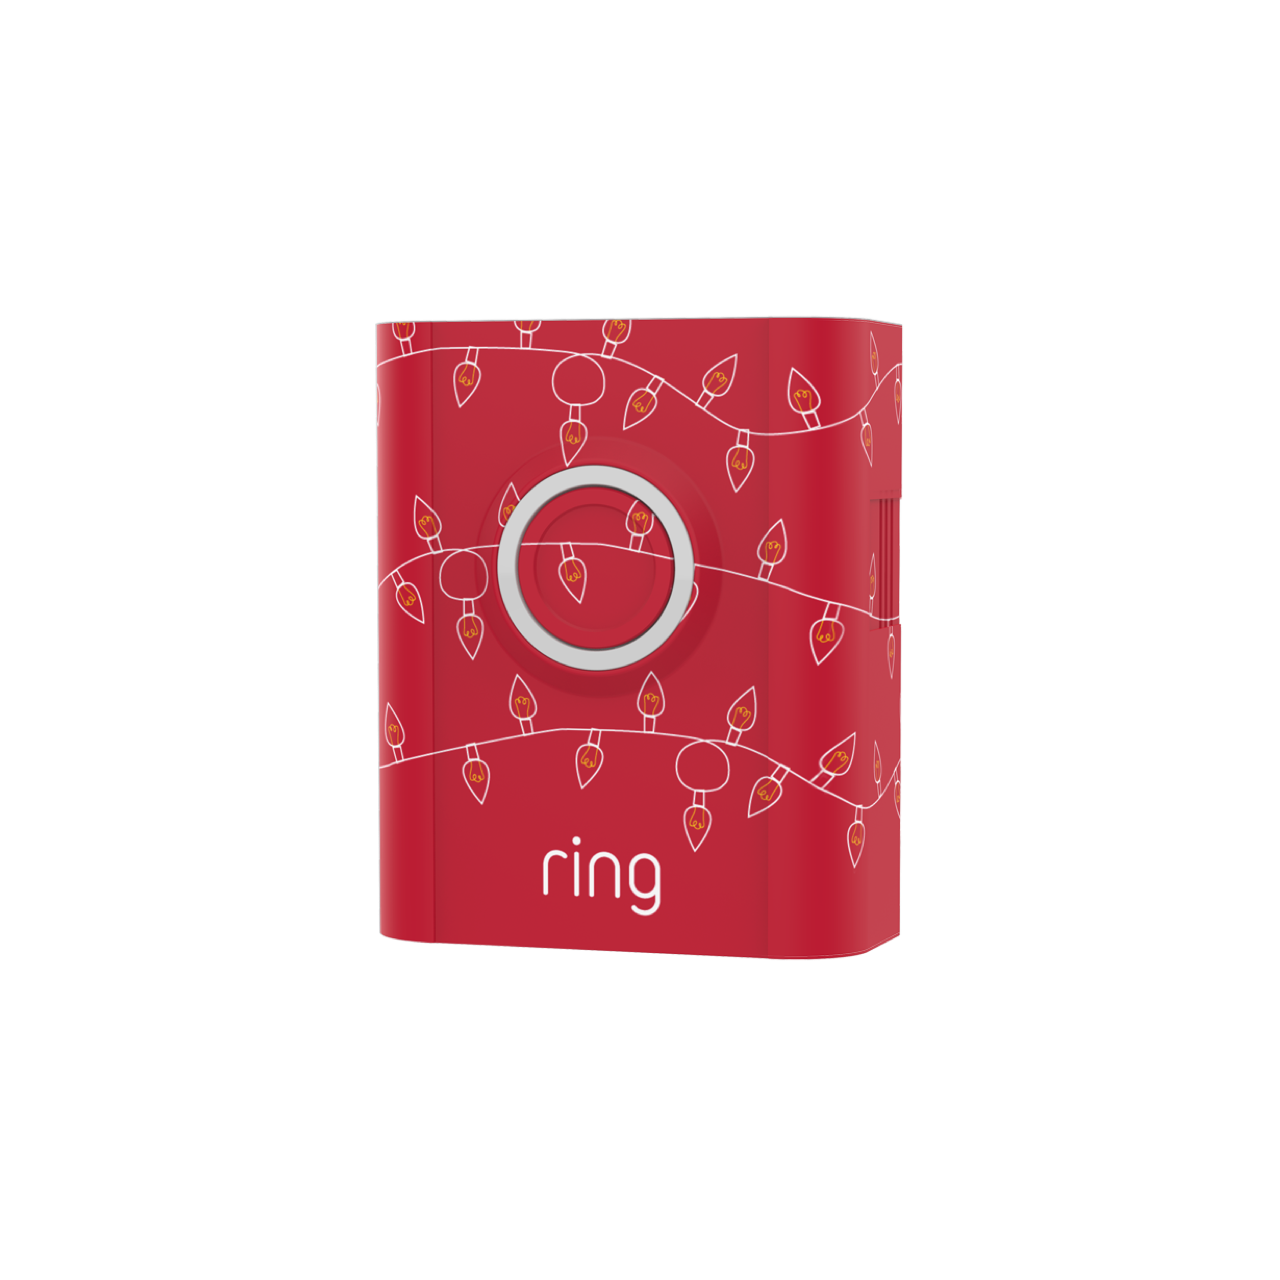 products/holidayfaceplate2021_red__1280x1280_b1bf5a66-106d-47de-8d74-d2b9fa08c488.png